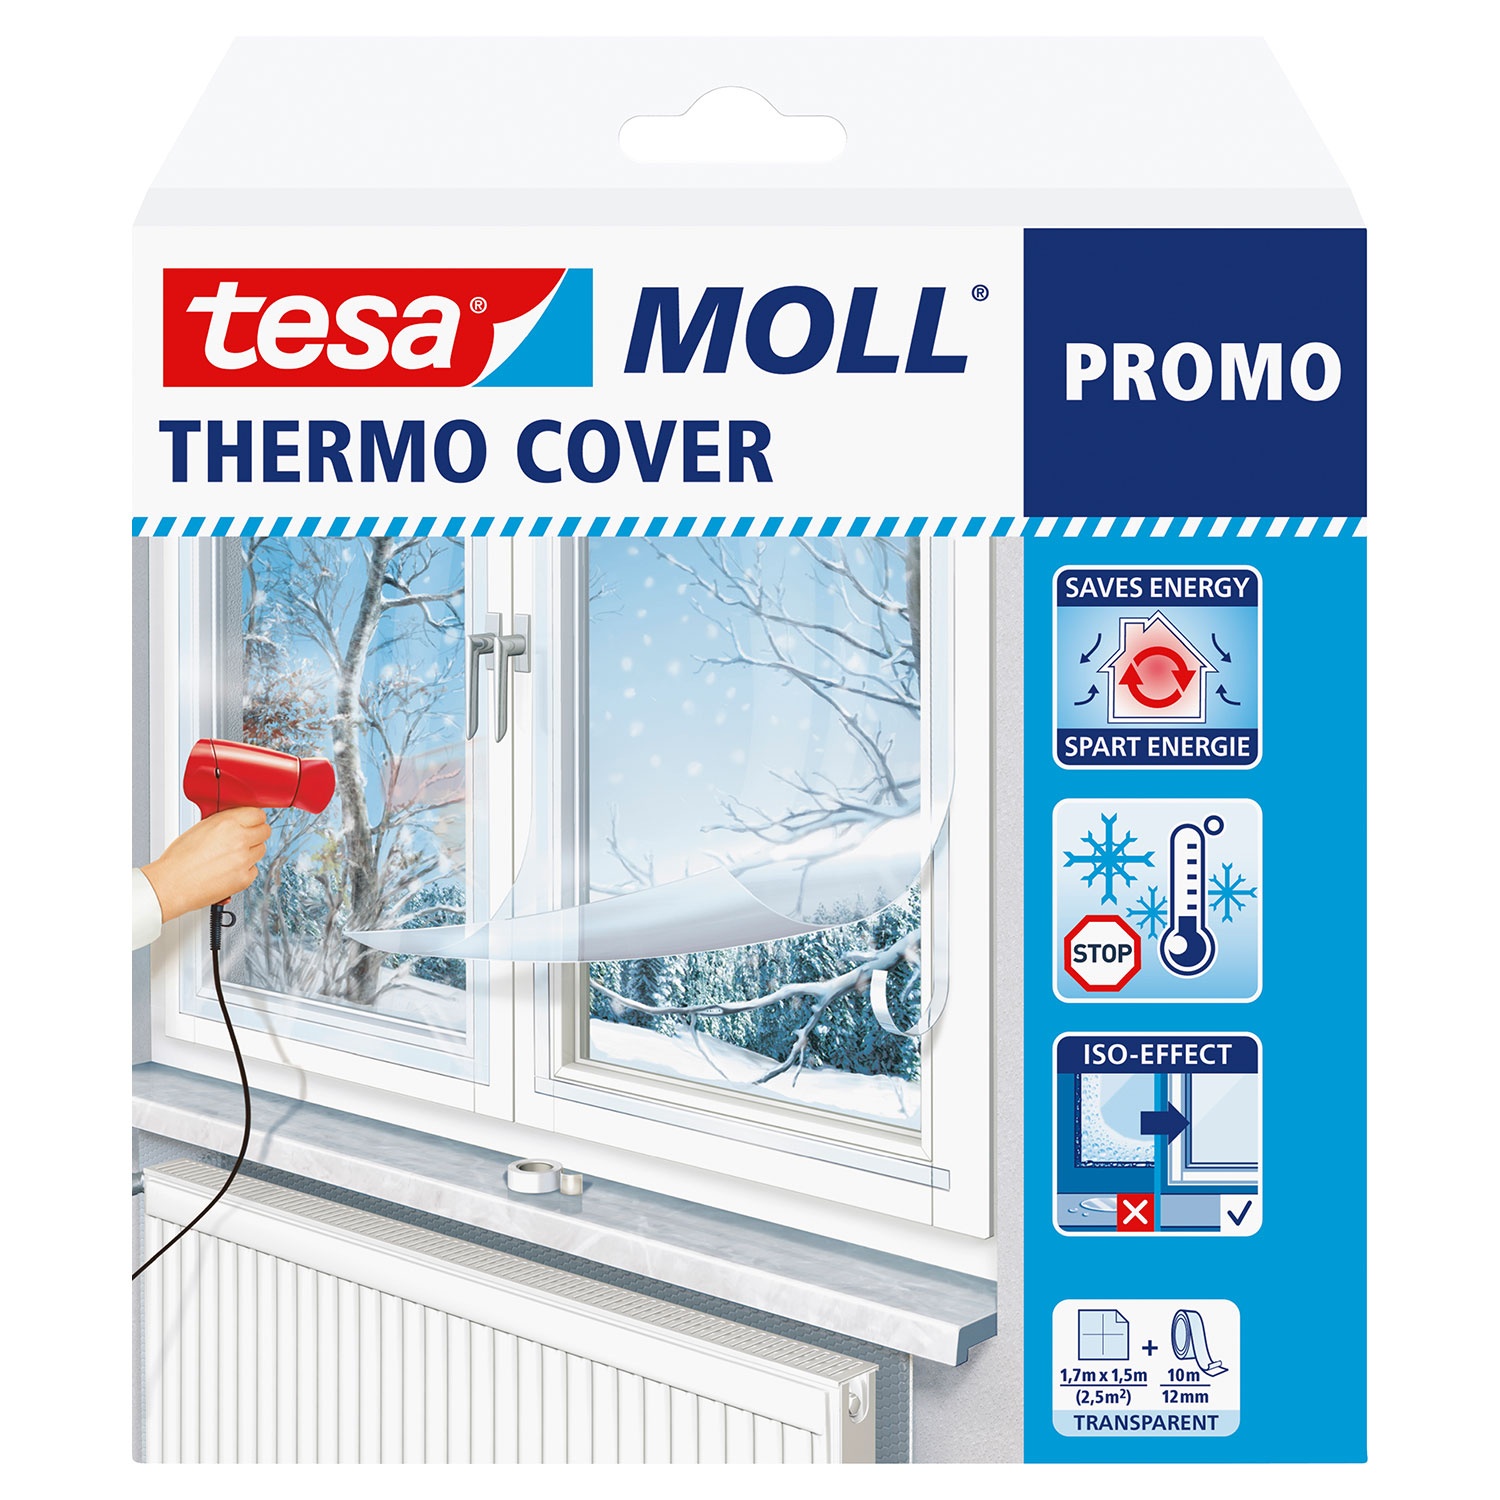 Tesa Moll Thermo Cover - Fenster Isolierfolie in Wuppertal